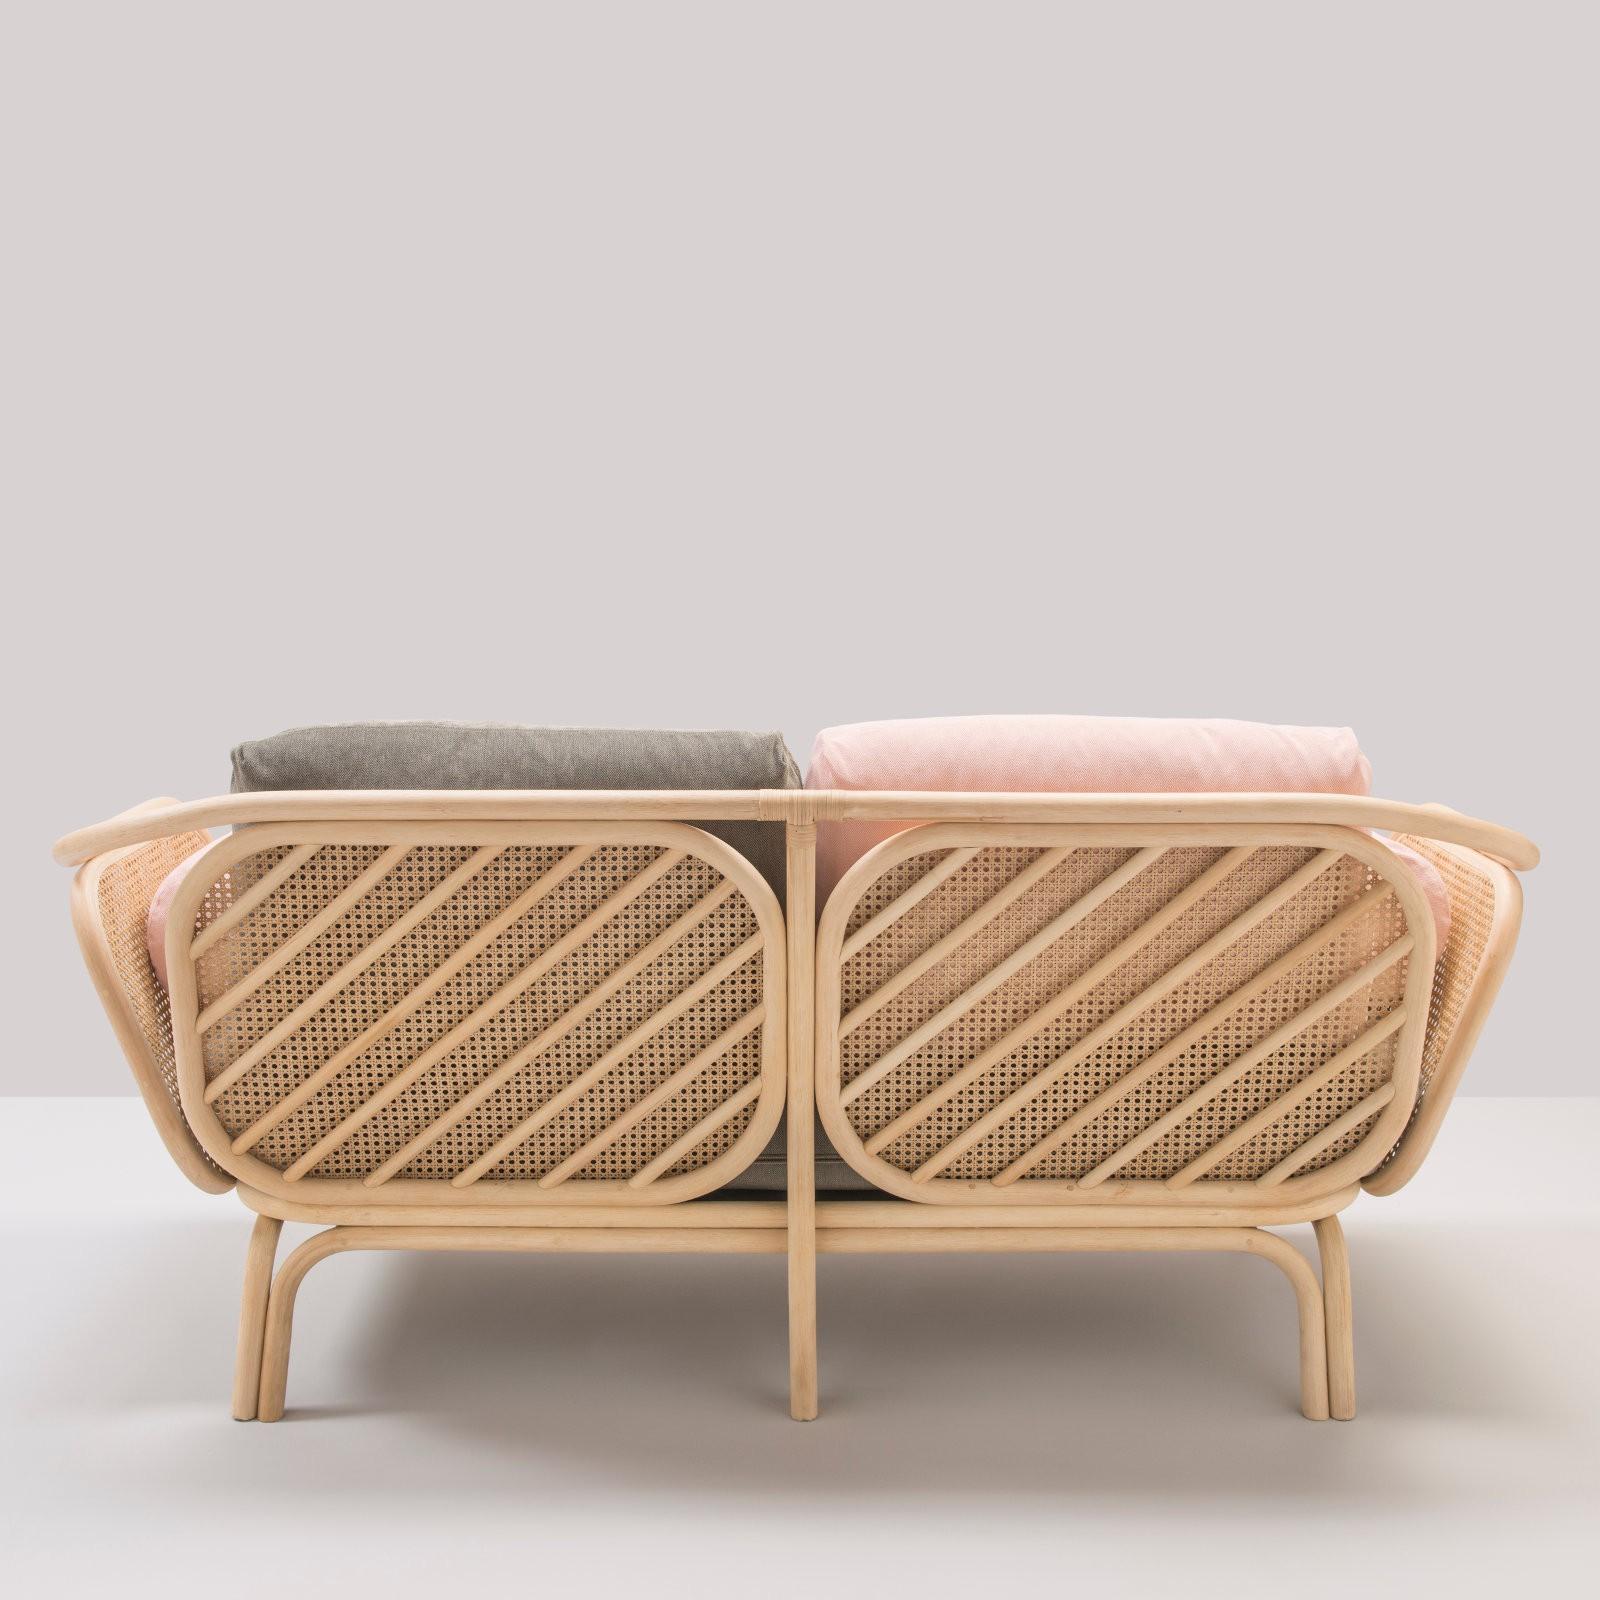 Timeless and airy lines, trendy and graphic design for this French sofa composed of a robust rattan structure decorated with caned windows and gorgeous fabric (new item, never used).